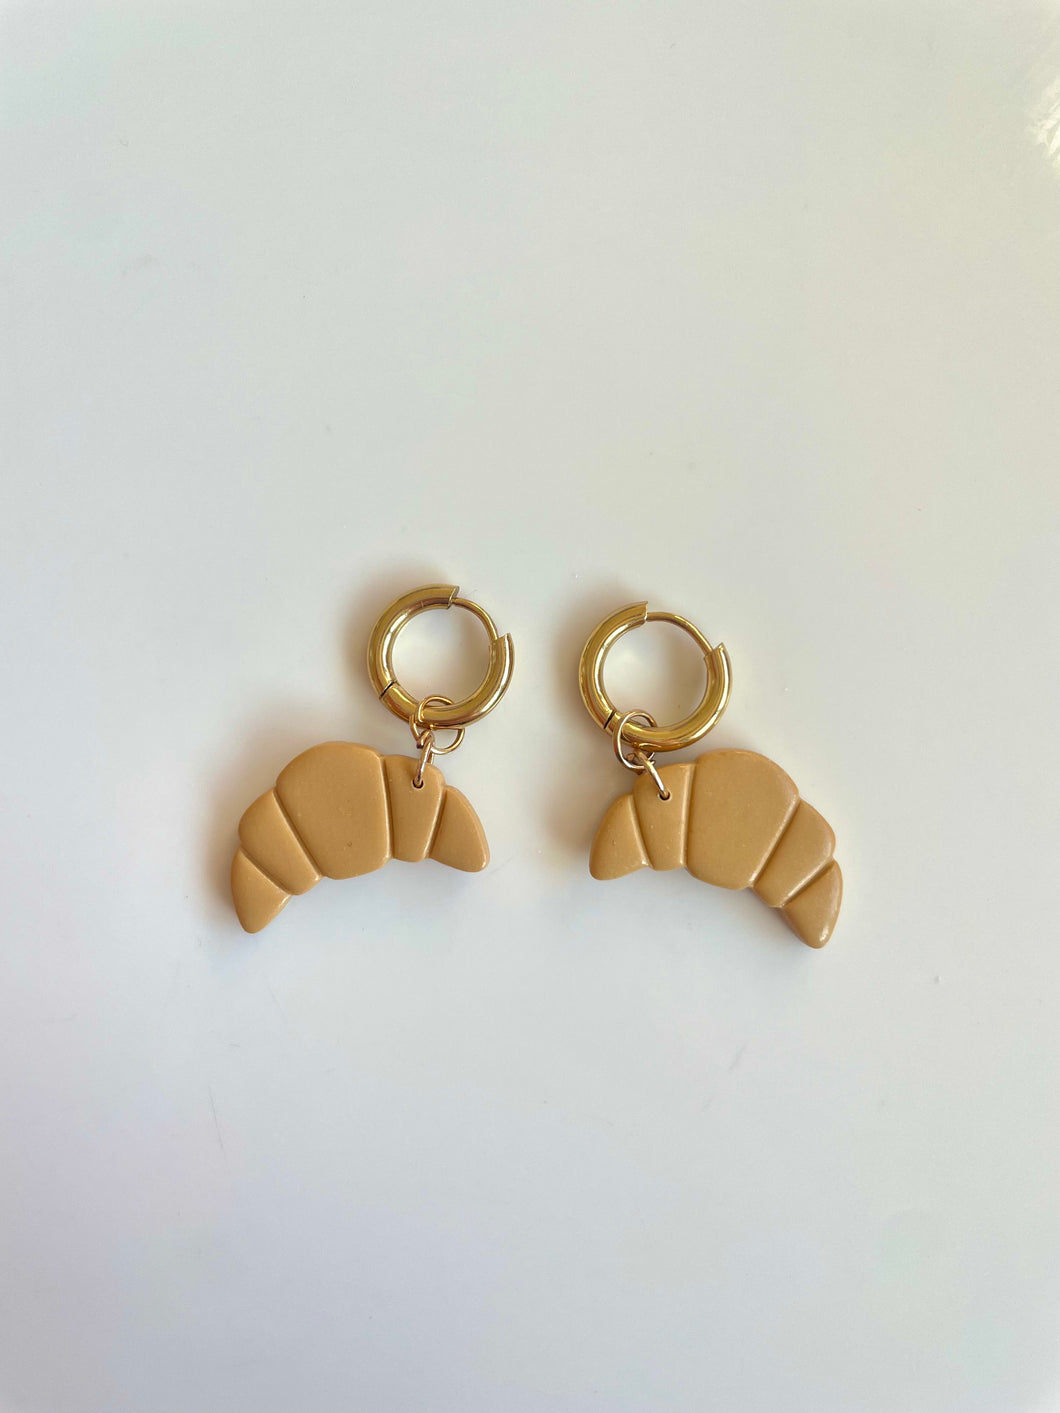 The Croissant hoops